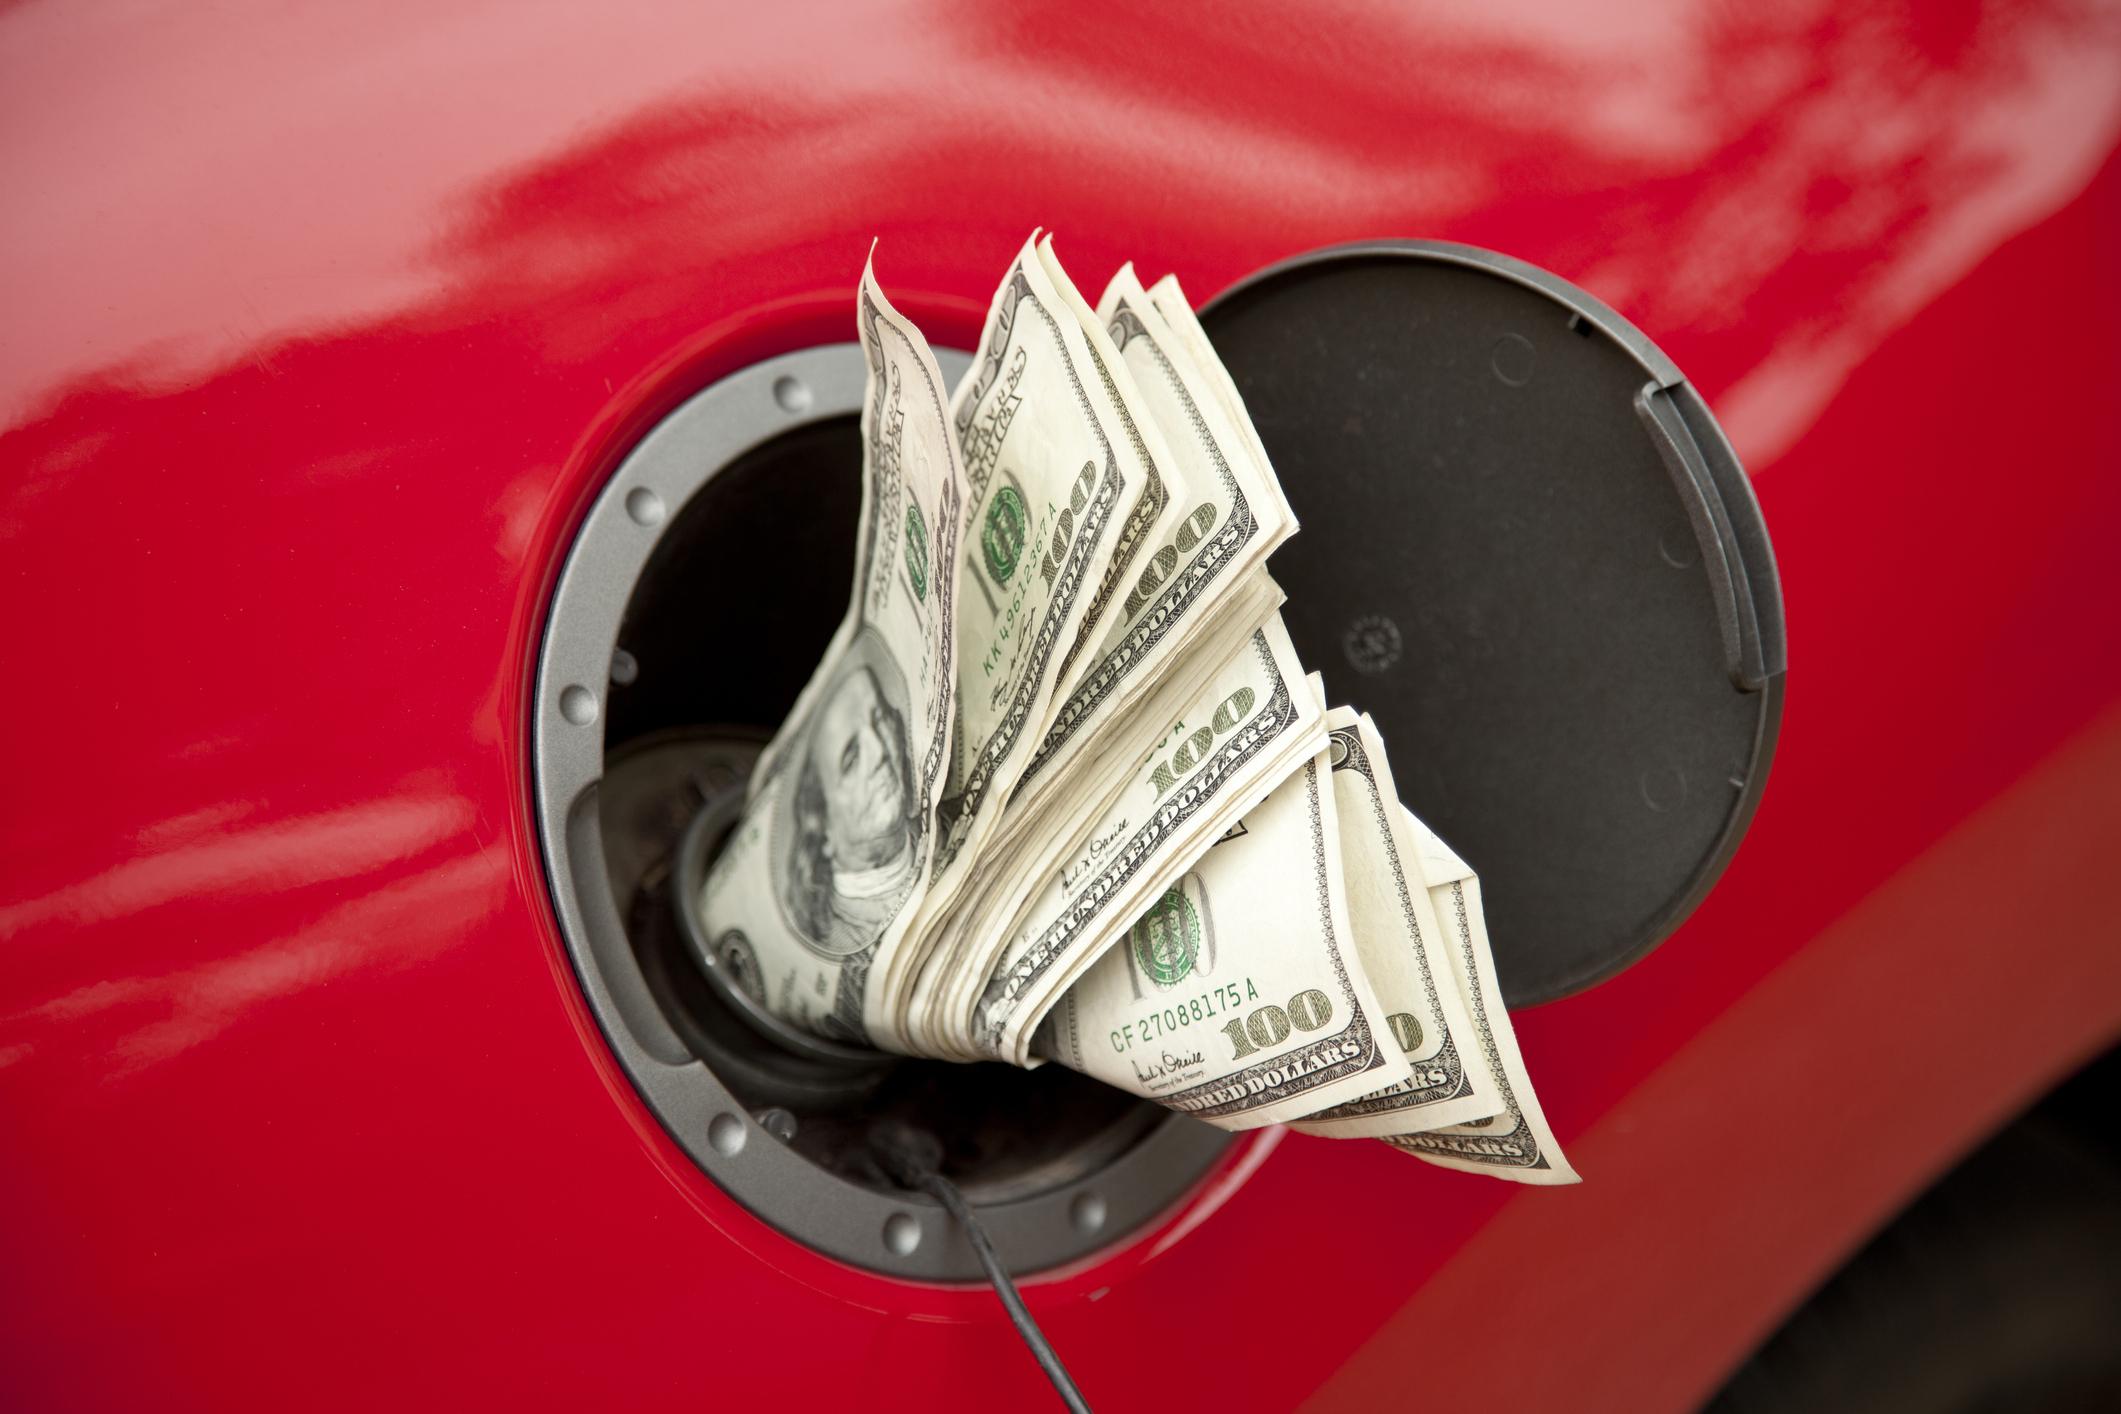 Concept shot of hundreds of dollars going into the gas tank of a red vehicle.  Price of gas continues to go higher.